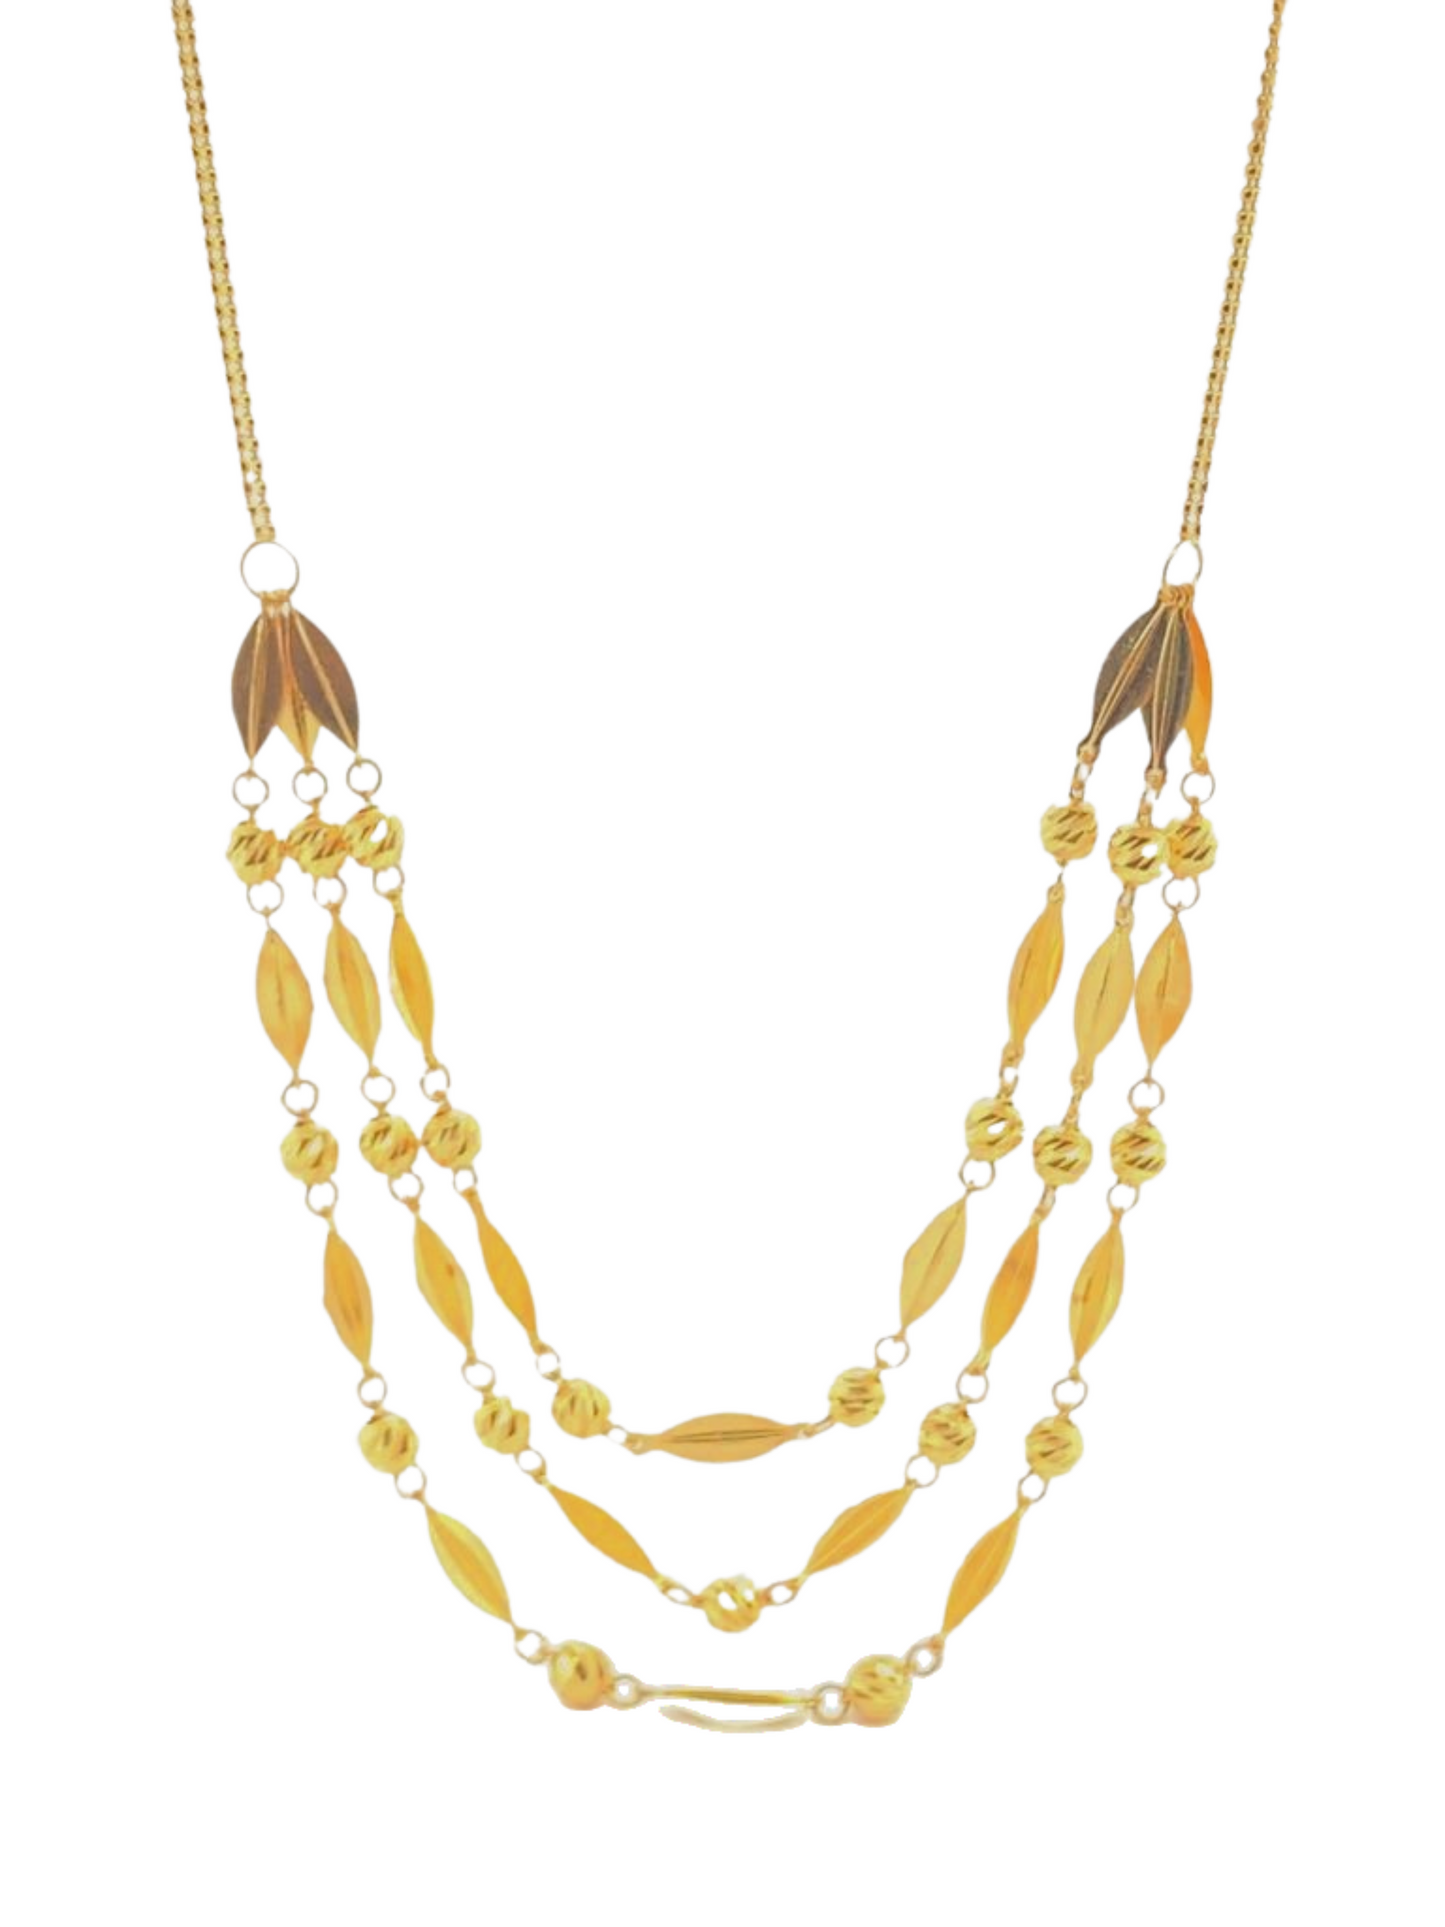 22KT Gold, Three Layer Necklace